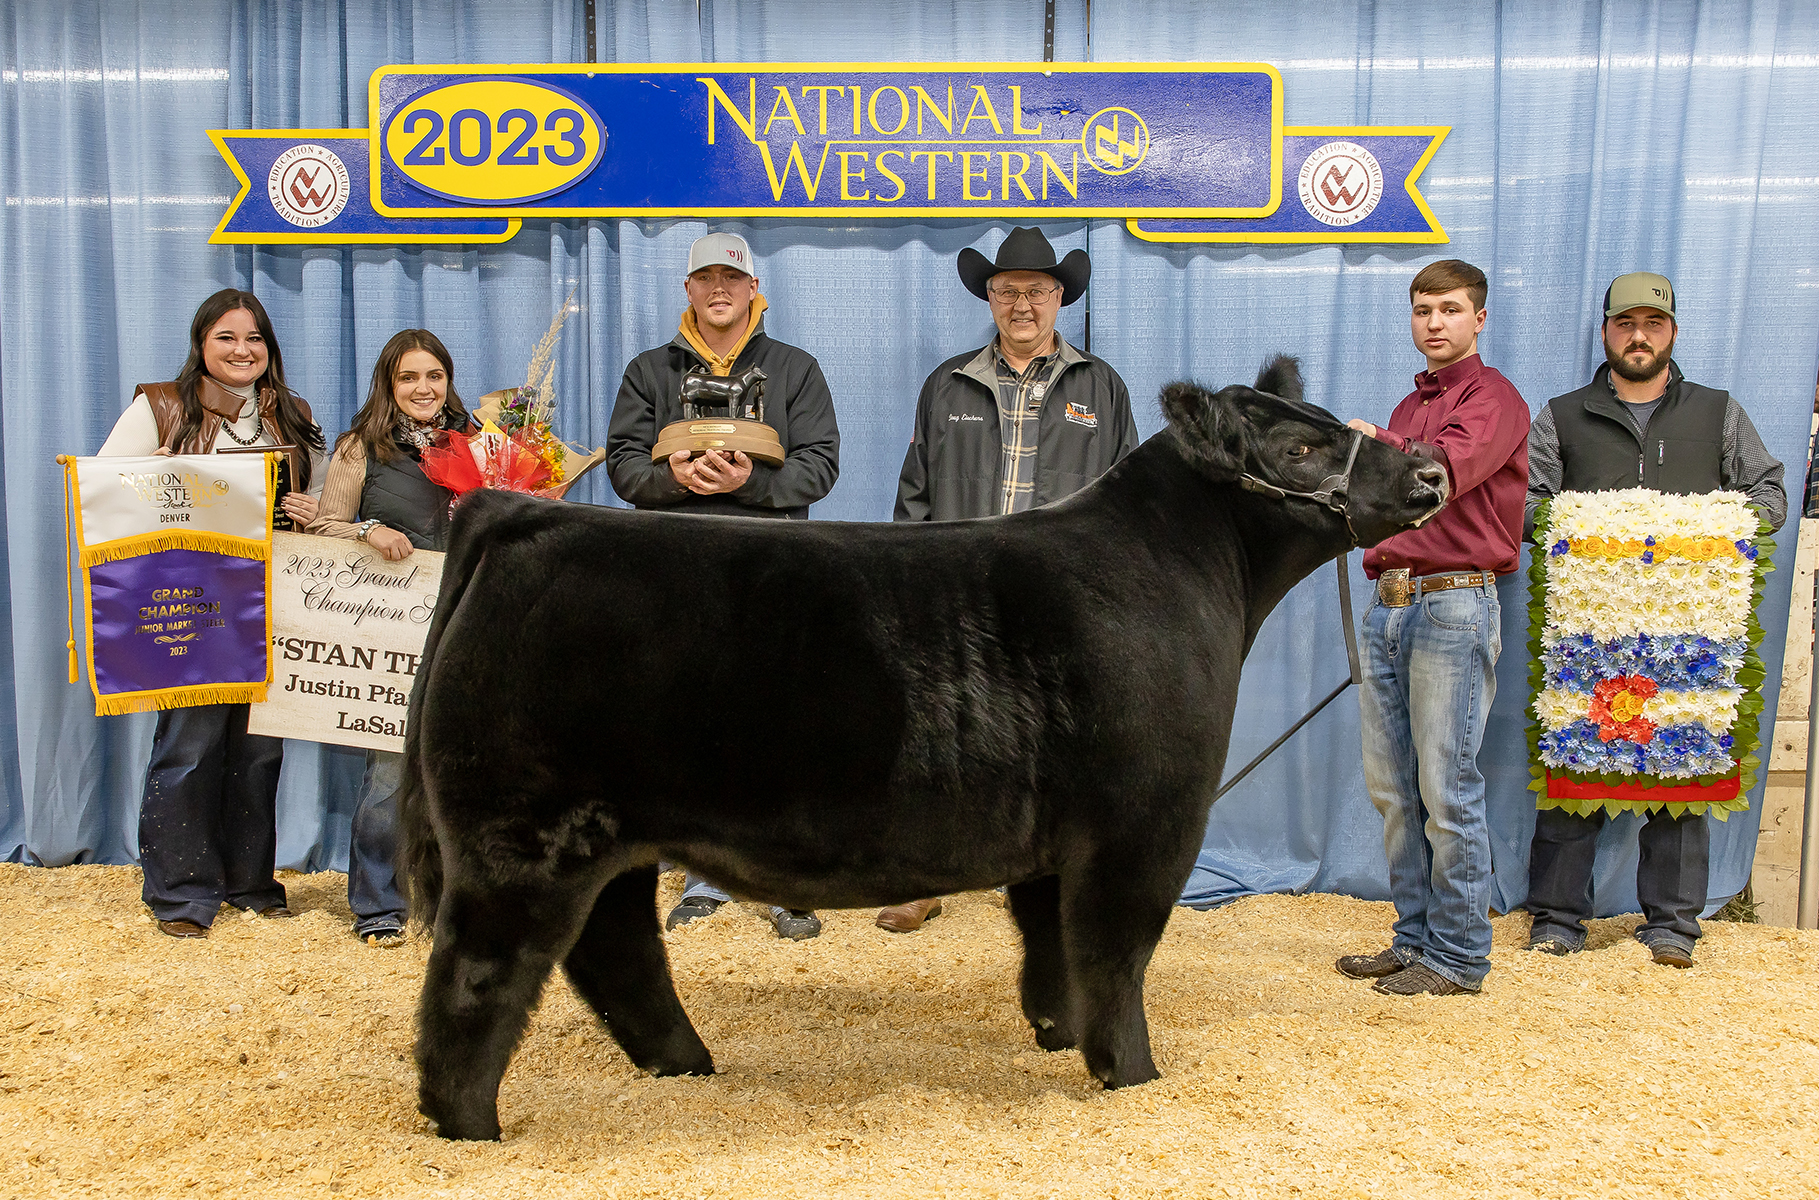 Canyon teen makes history with Grand Champion Steer sale at 2023 FWSSR